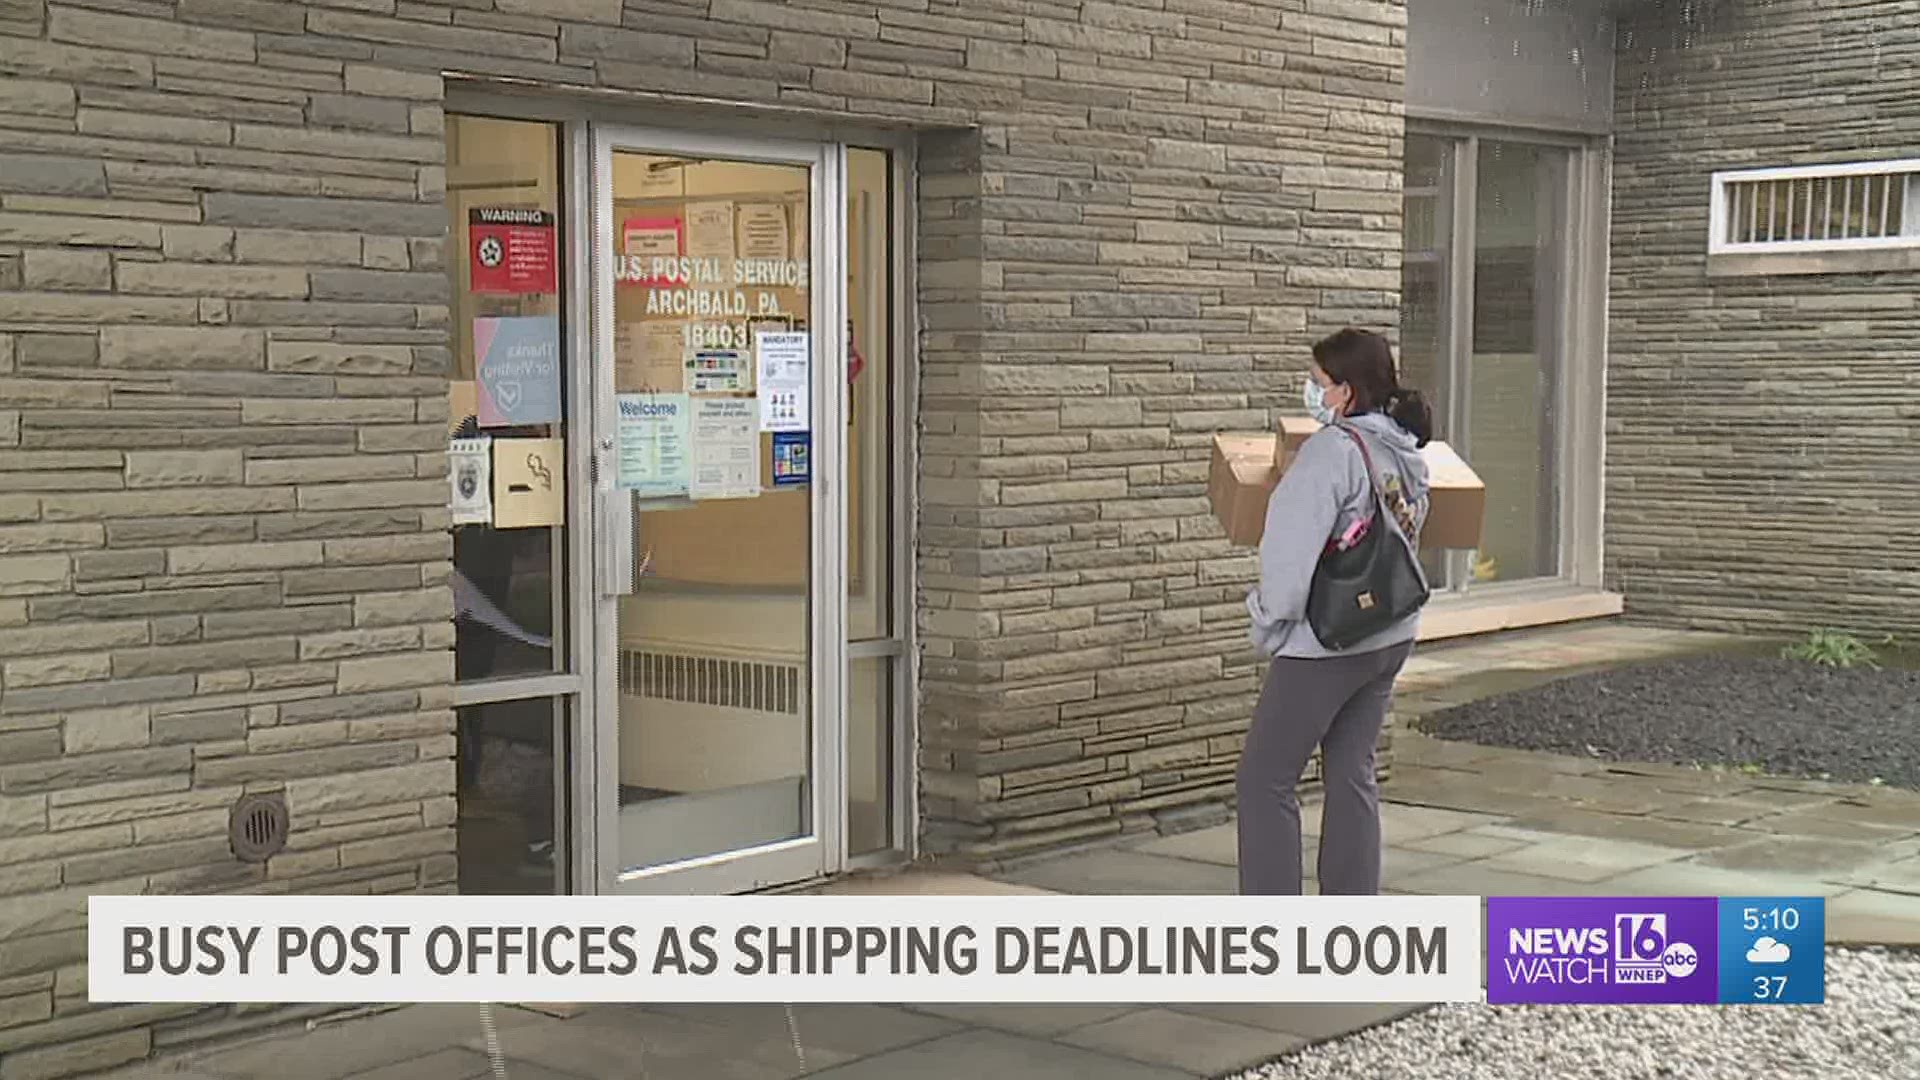 We found long lines at post offices in Lackawanna County as customers were trying to make the deadline and avoid snow predicted for later this week.